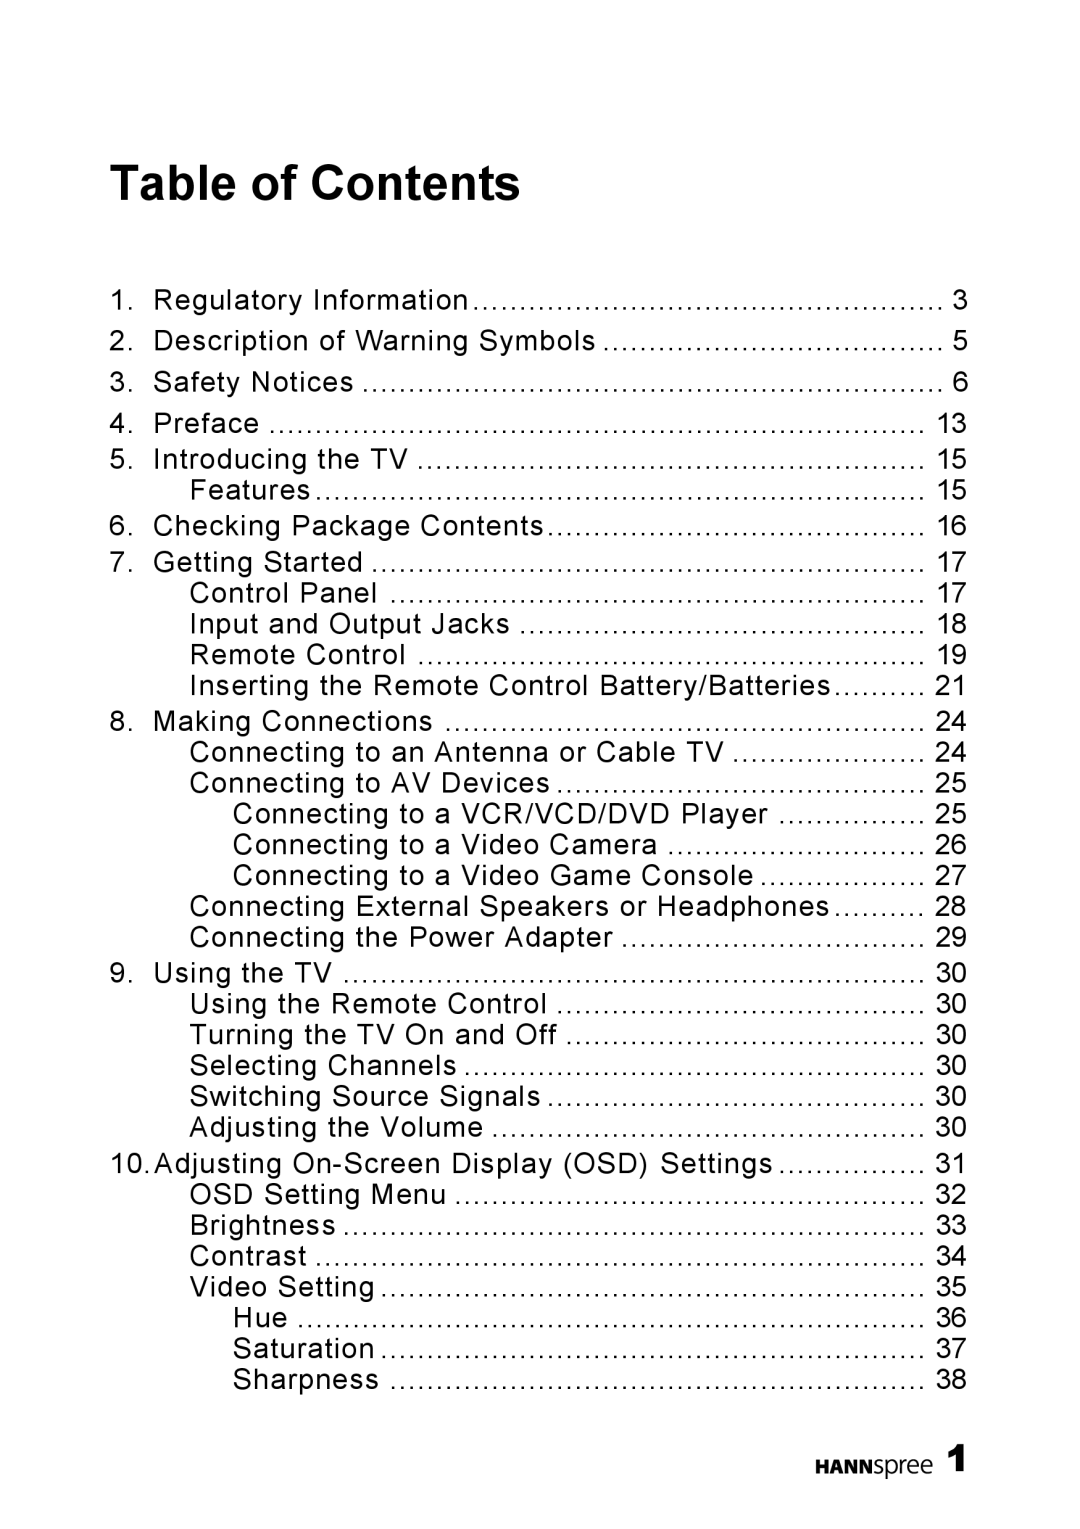 HANNspree HANNSz.crab user manual Table of Contents 